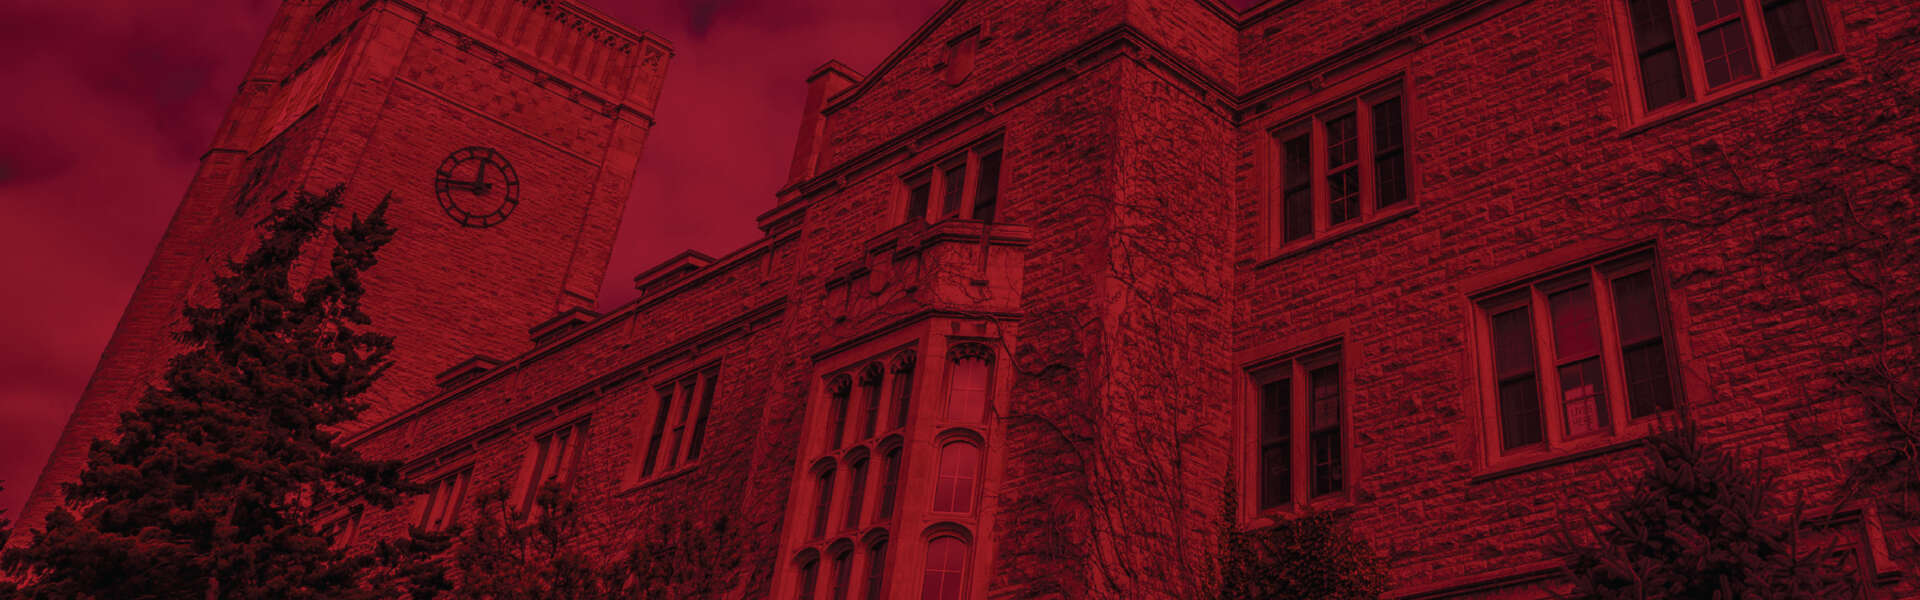 EIR Decorative Image of Campus in Red